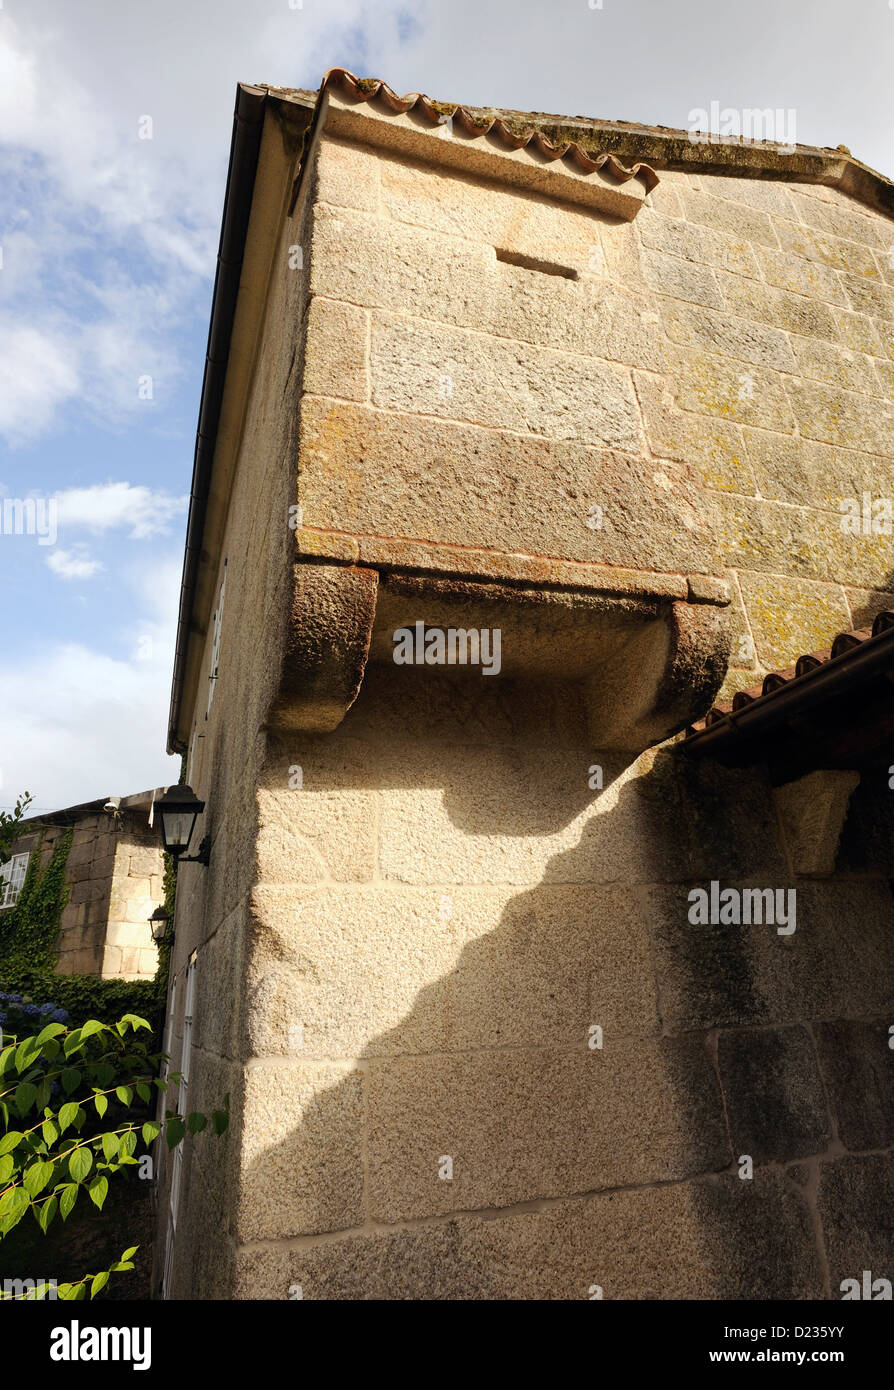 Lavatory facilities in an eighteenth century manor house, a corbelled guarderobe over the garden. Coles, Ourense, Galicia, Spain Stock Photo